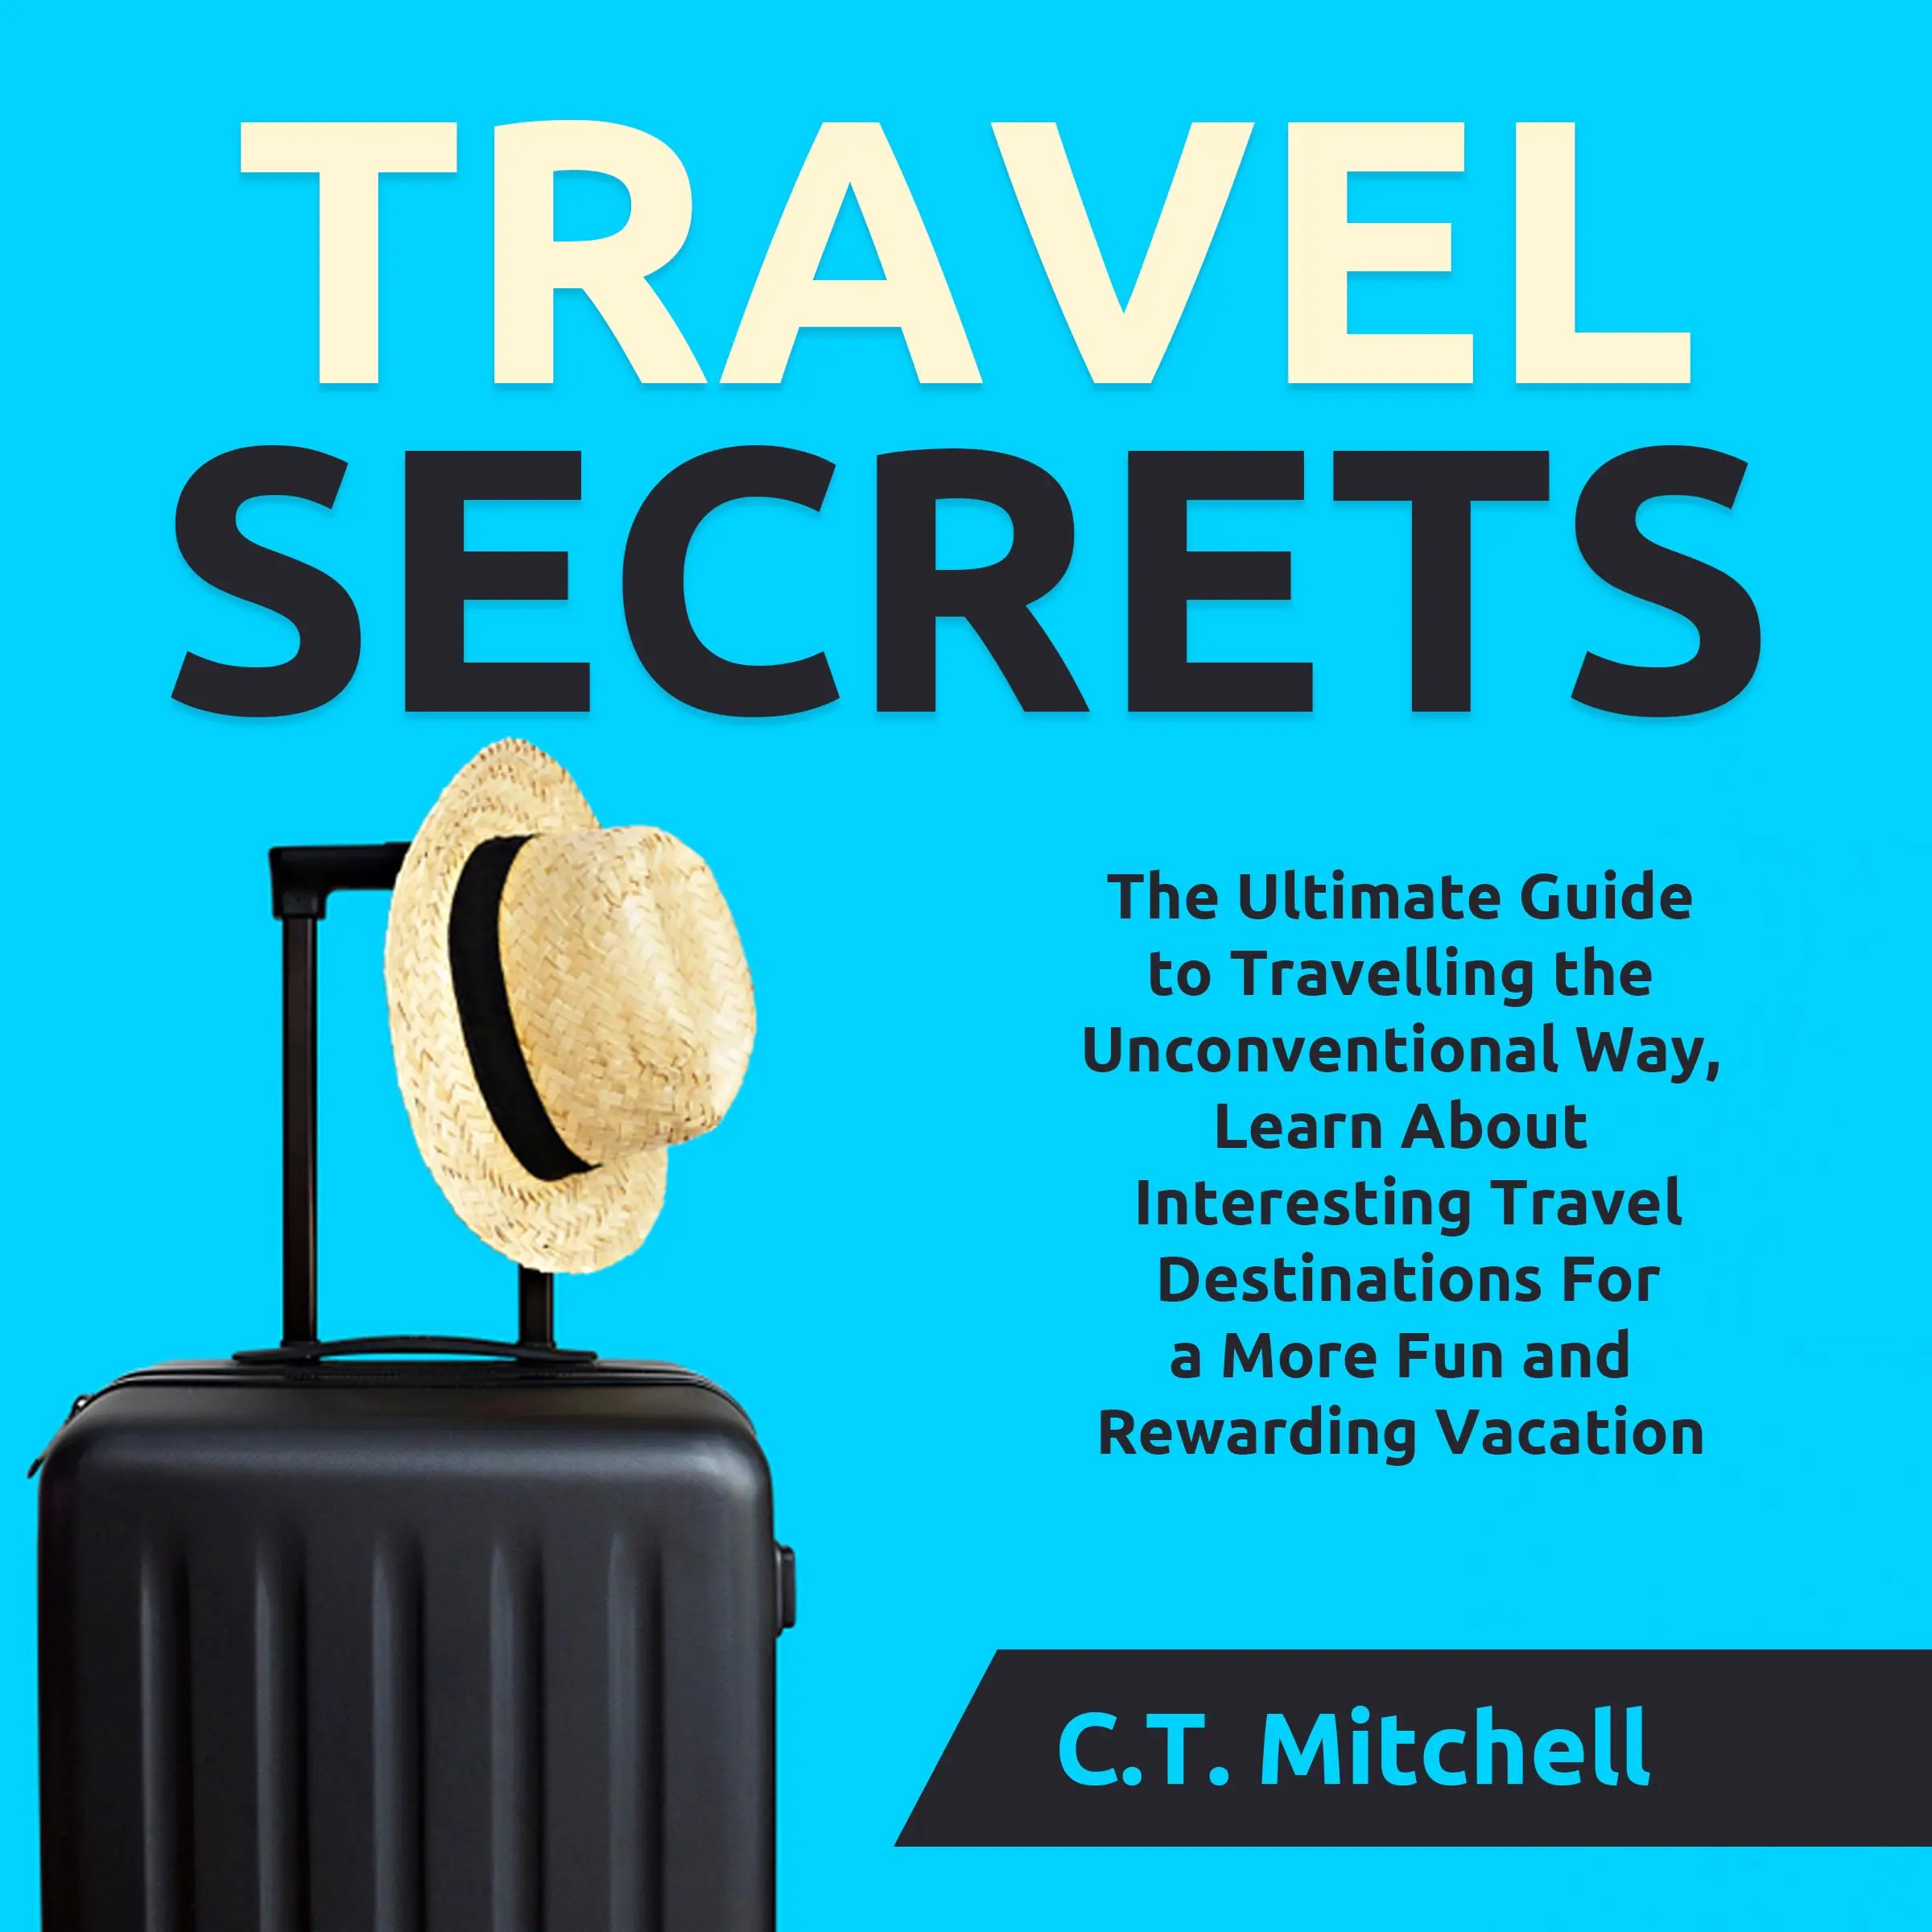 Travel Secrets: The Ultimate Guide to Travelling the Unconventional Way, Learn About Interesting Travel Destinations For a More Fun and Rewarding Vacation by C.T. Mitchell Audiobook